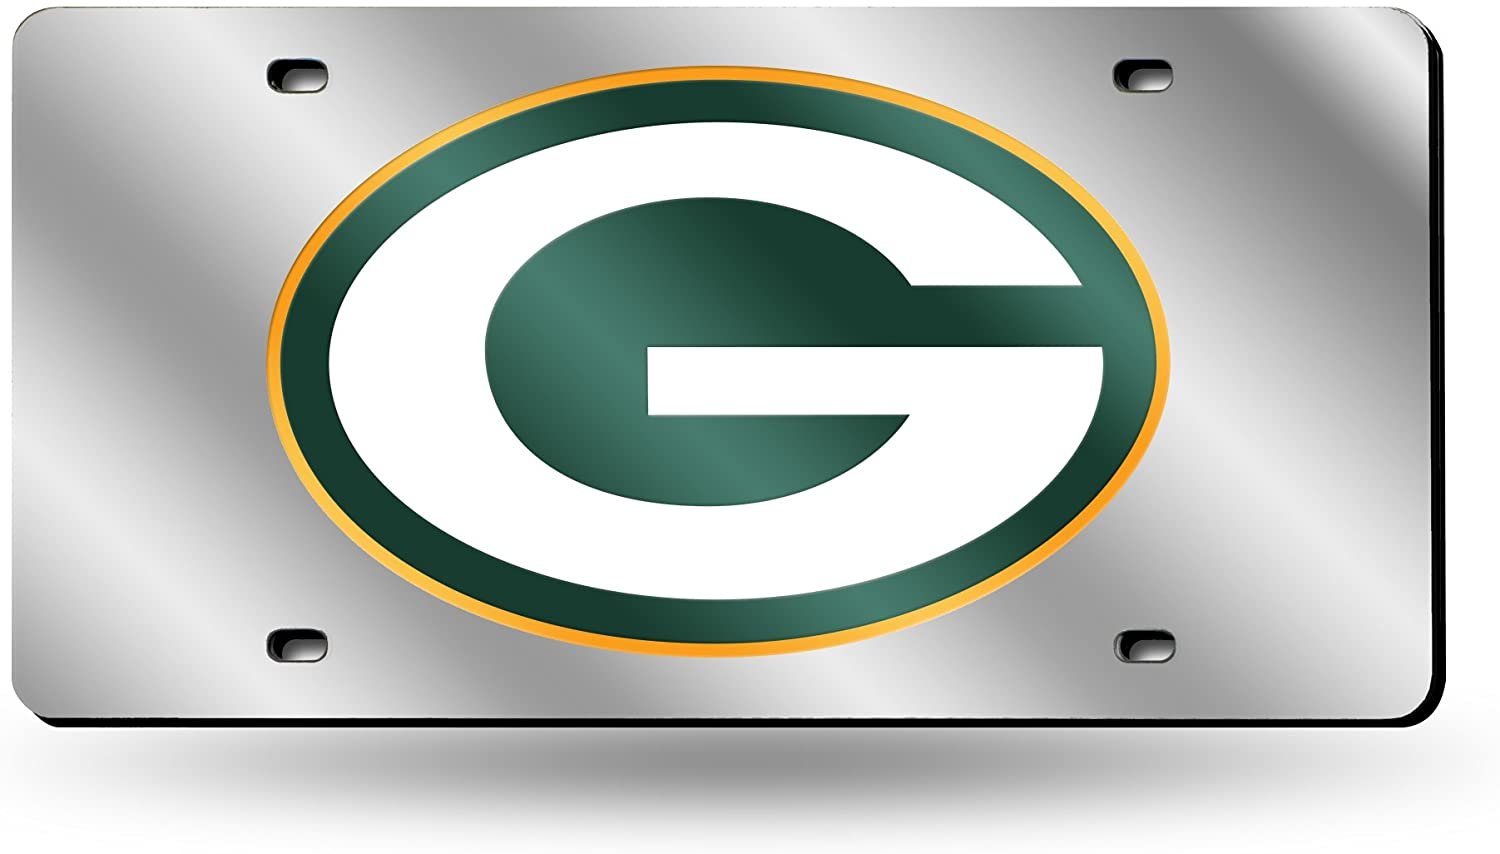 Green Bay Packers Premium Laser Cut Tag License Plate, Mirrored Acrylic Inlaid, 12x6 Inch